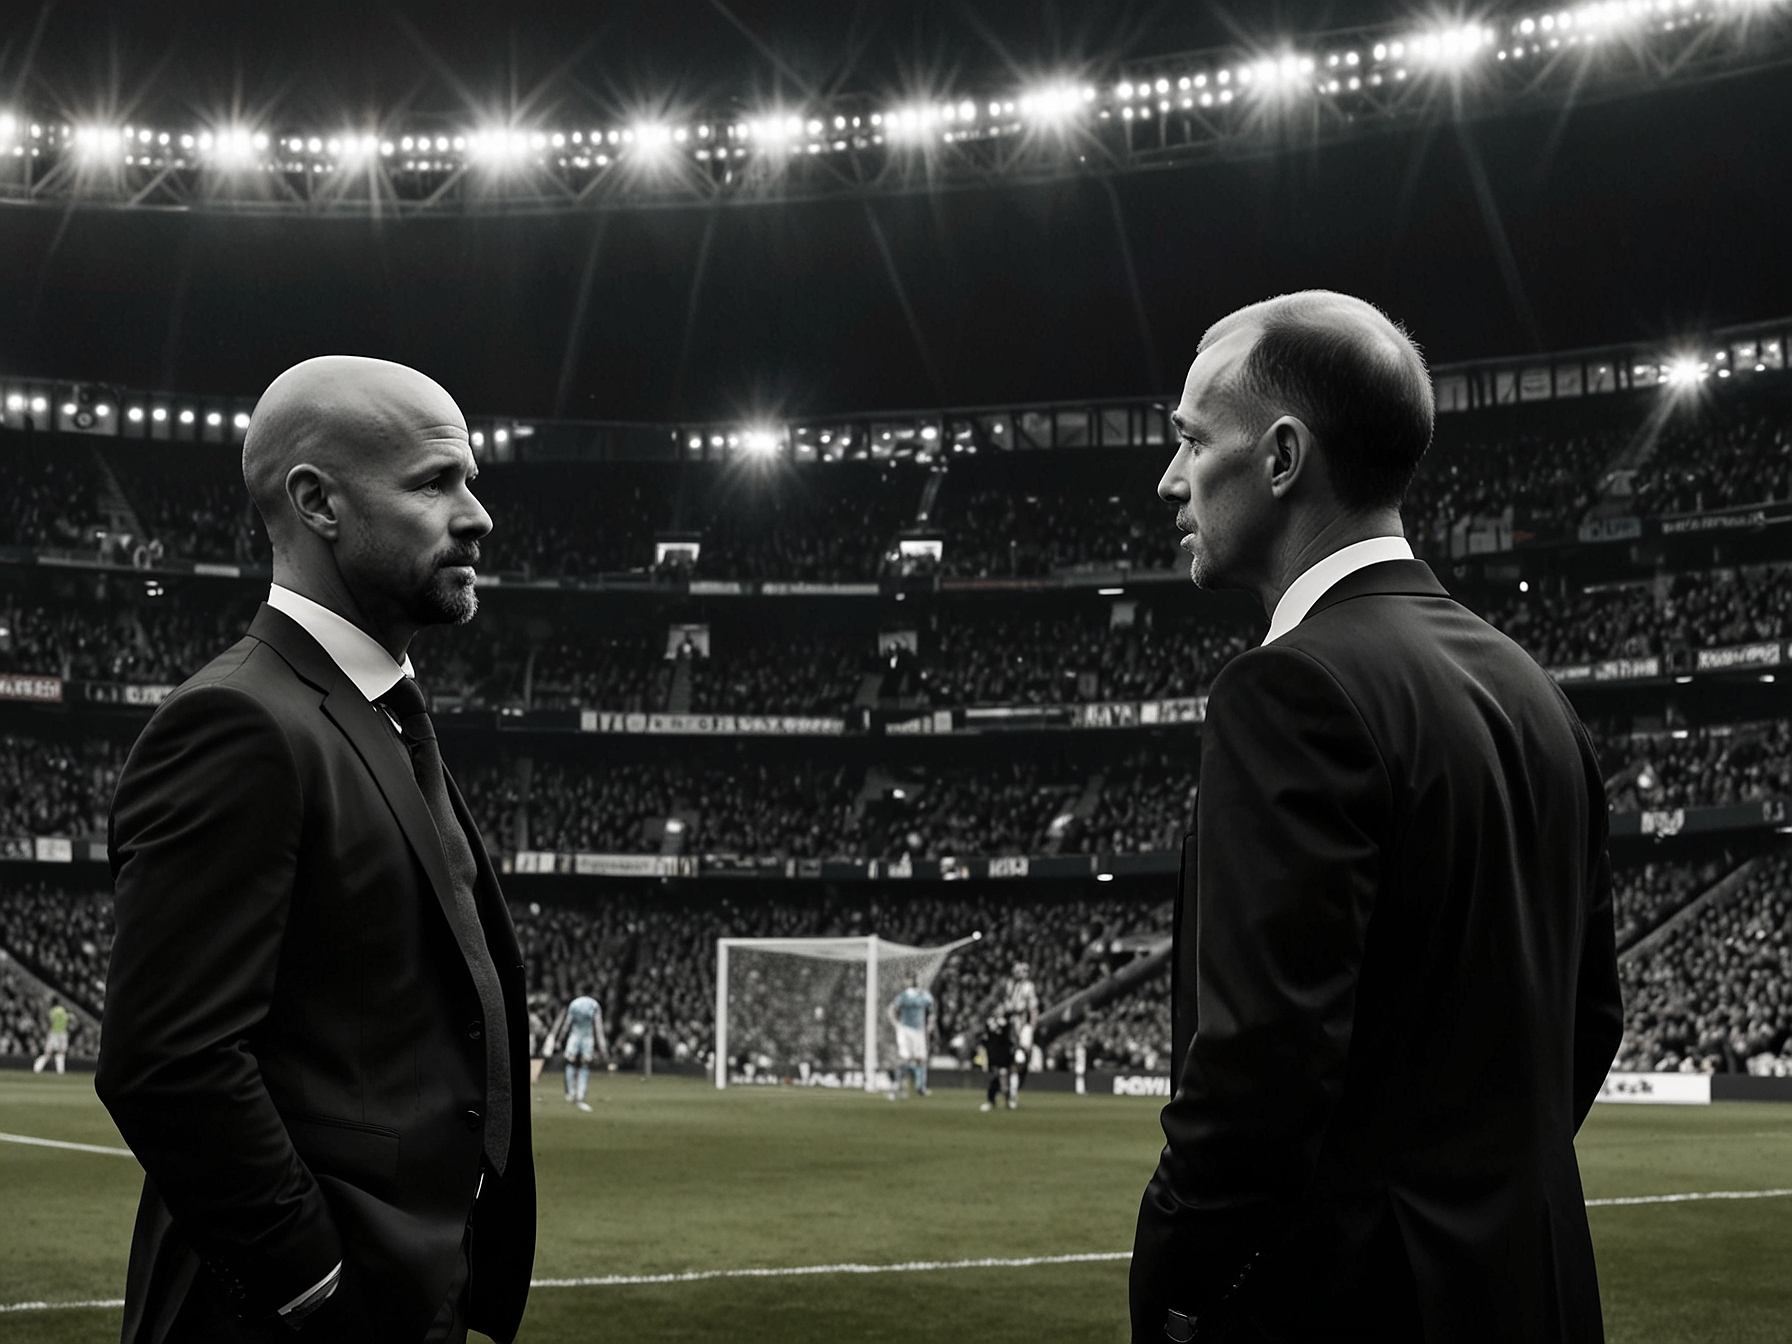 Manchester United's manager, Erik ten Hag, strategizing during a match. His focus on reinforcing the team's defense is reflected in the interest in Jarrad Branthwaite amid competition from Manchester City.